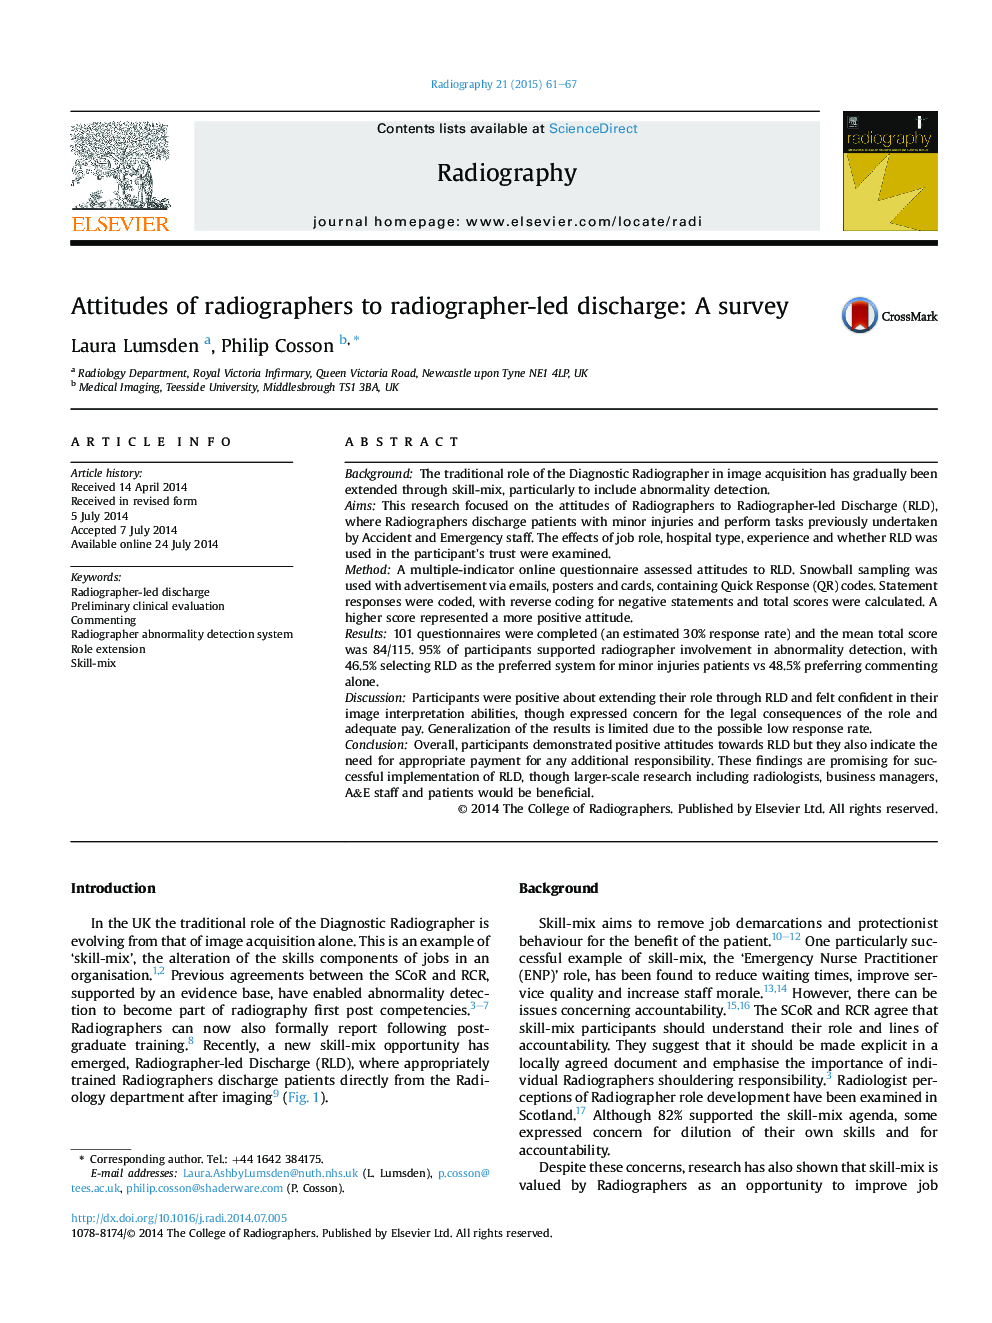 Attitudes of radiographers to radiographer-led discharge: A survey